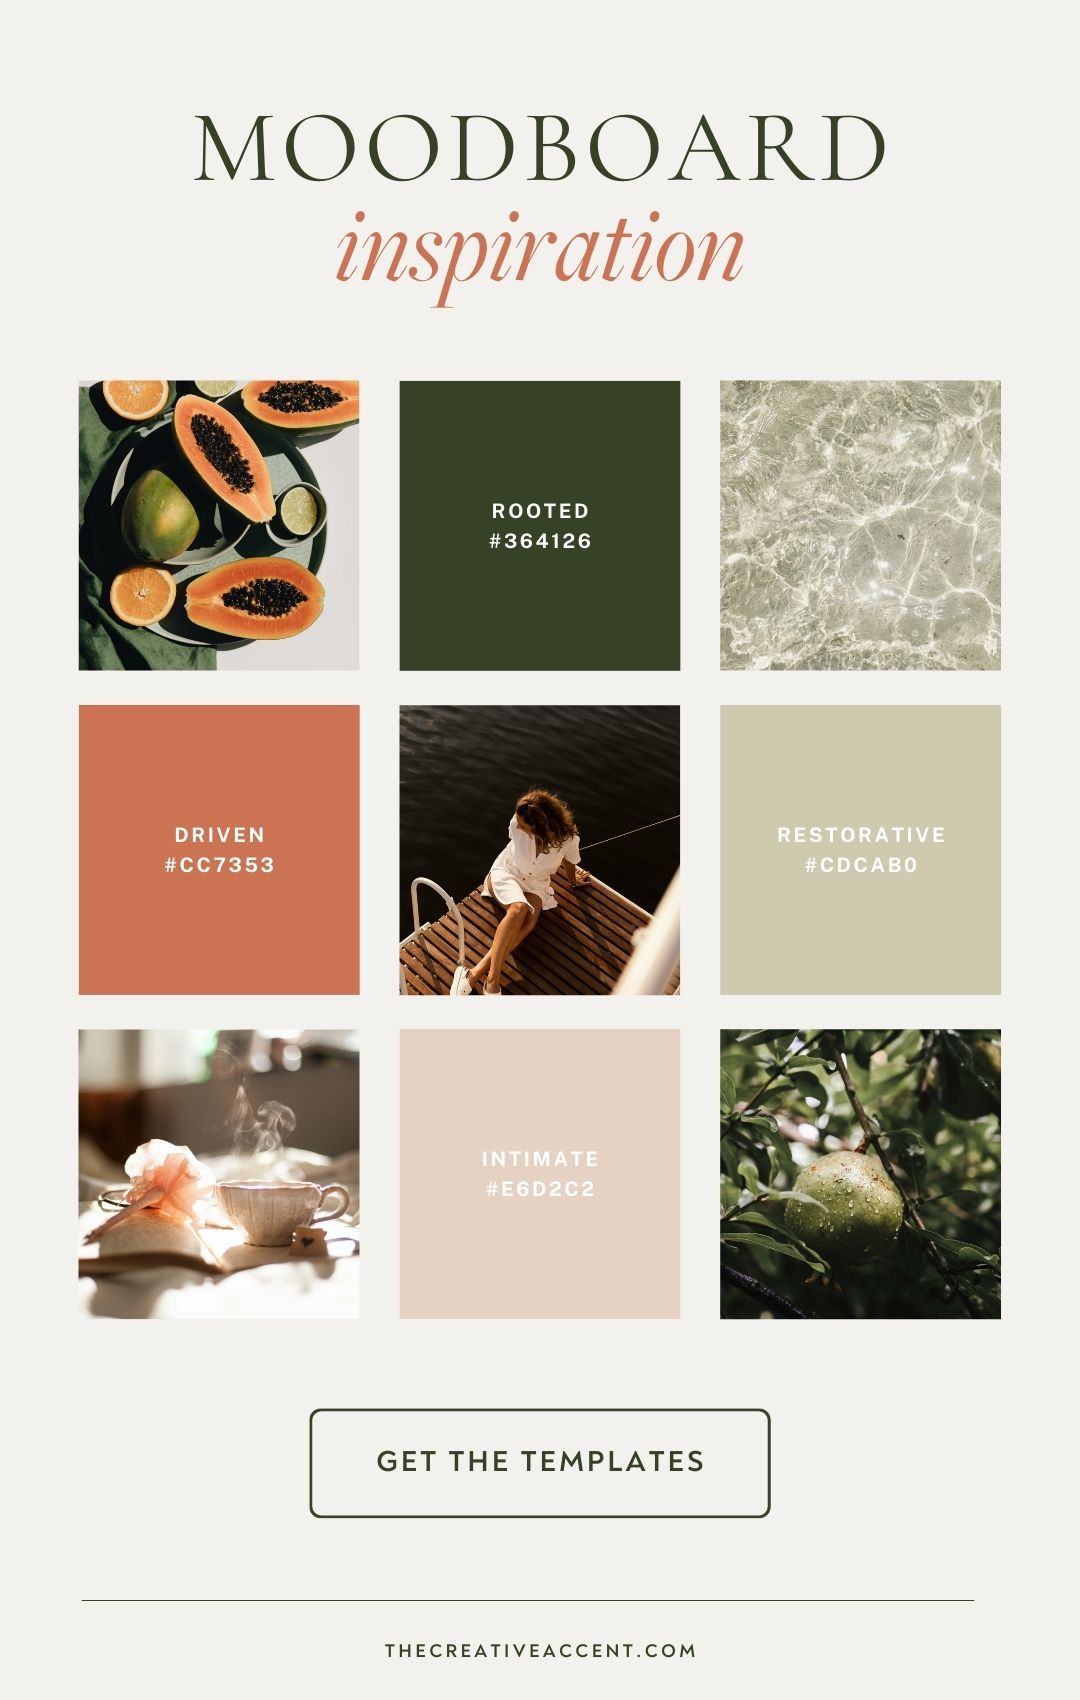 Mood board inspiration and link to get the Canva templates